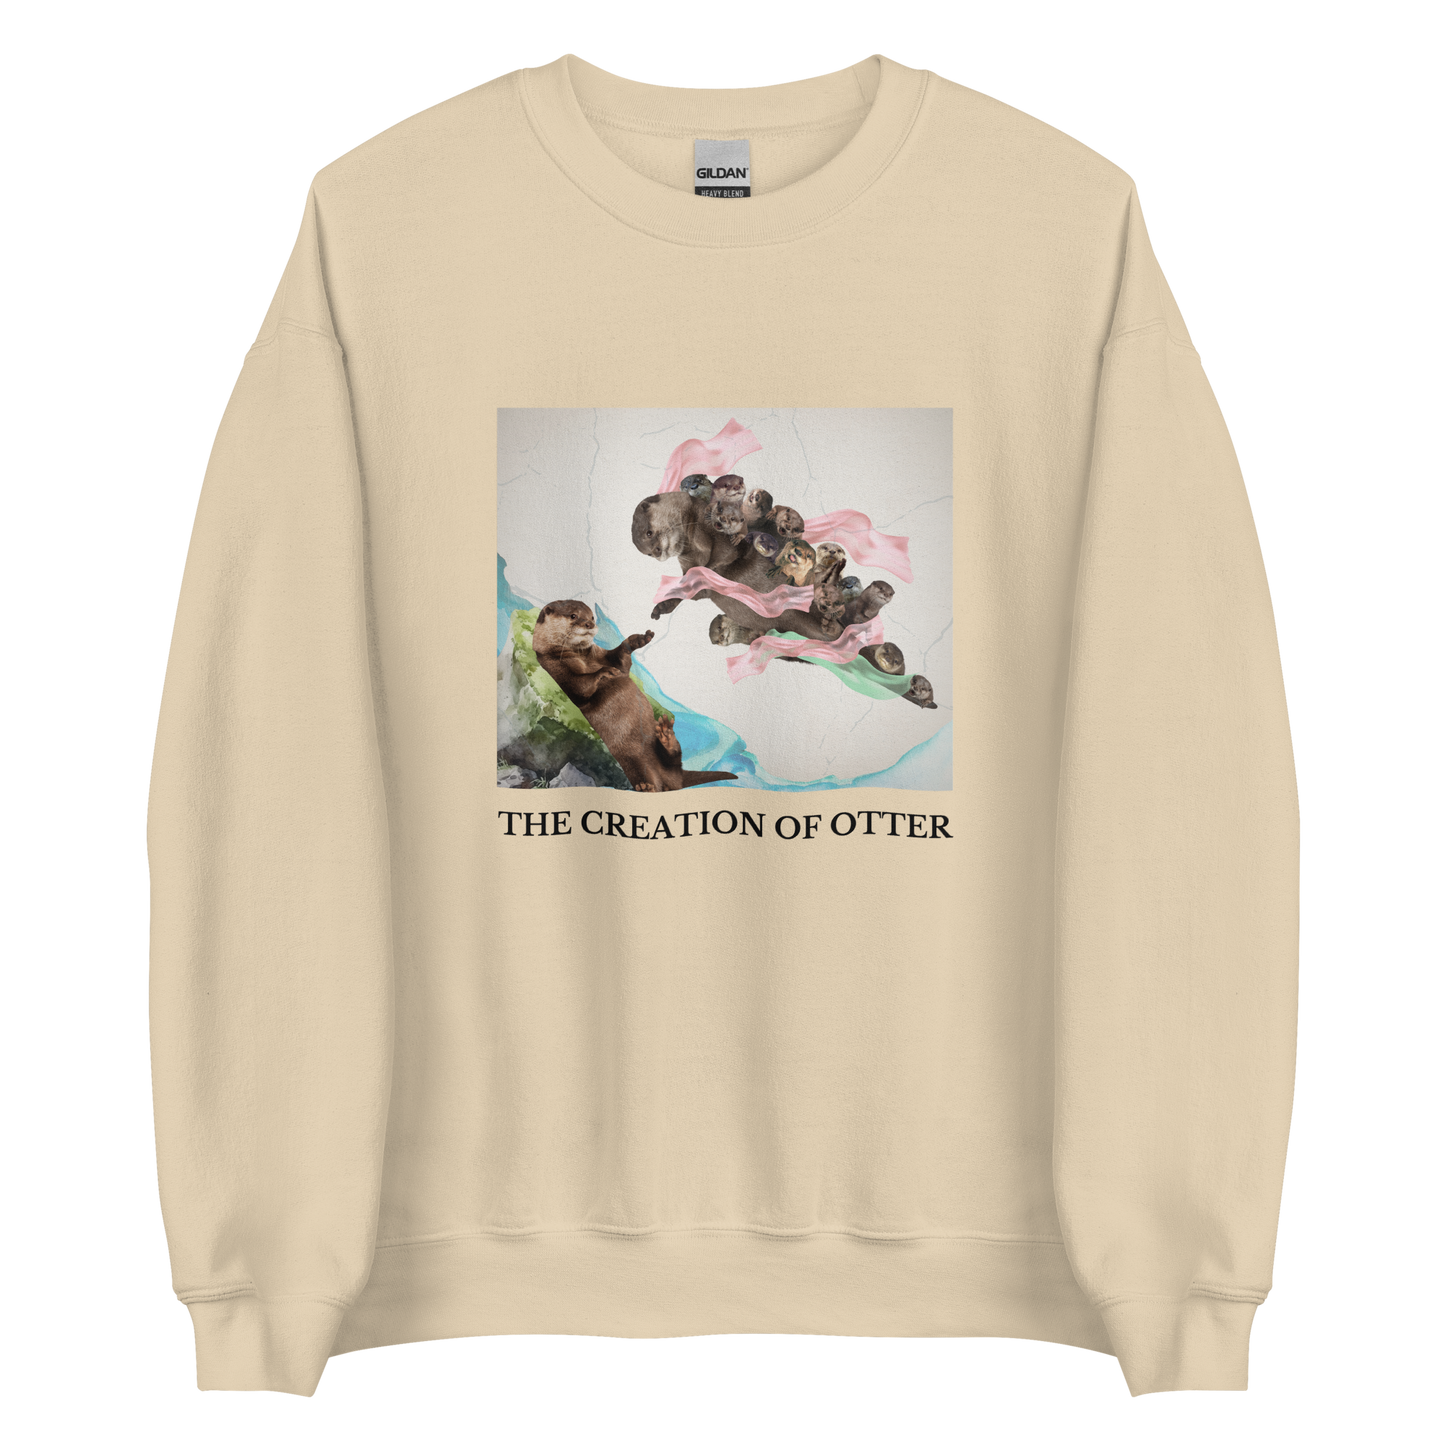 Sand Colored Otter Sweatshirt featuring a playful The Creation of Otter parody of Michelangelo's masterpiece - Artsy/Funny Graphic Otter Sweatshirts - Boozy Fox